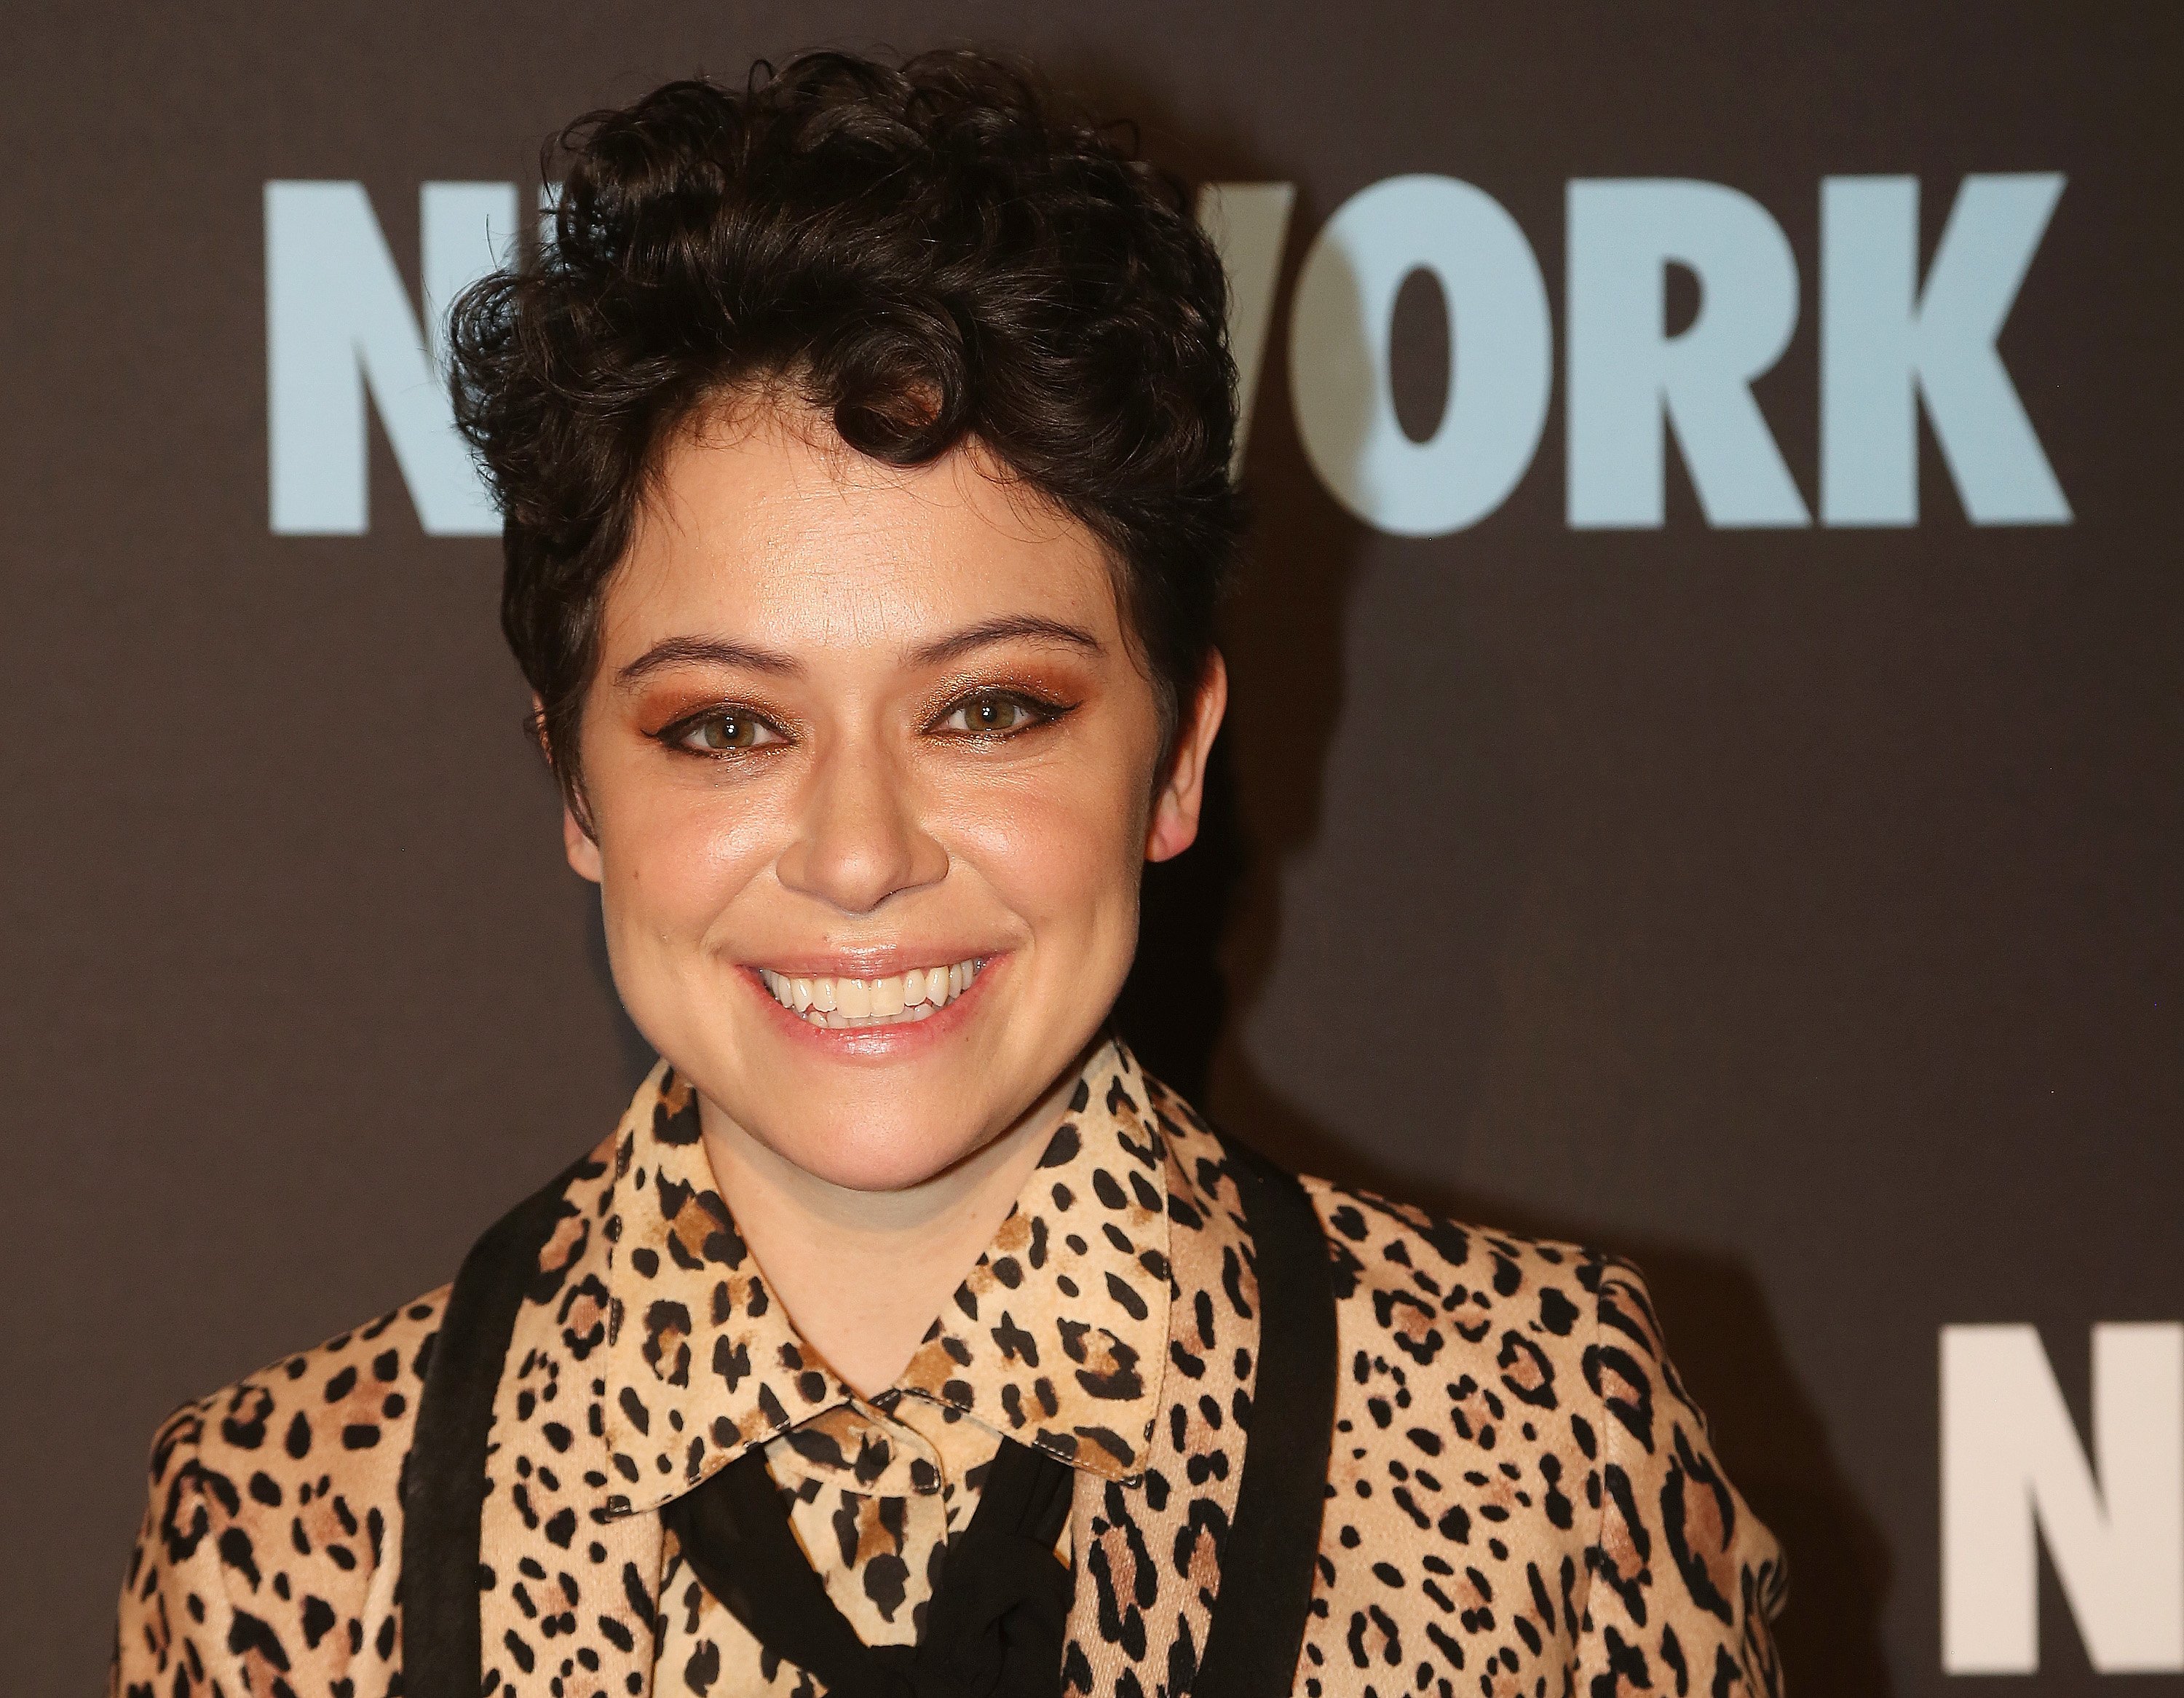 Tatiana Maslany poses at the opening night after party for the play 'Network' on Broadway on December 6, 2018 in New York City.